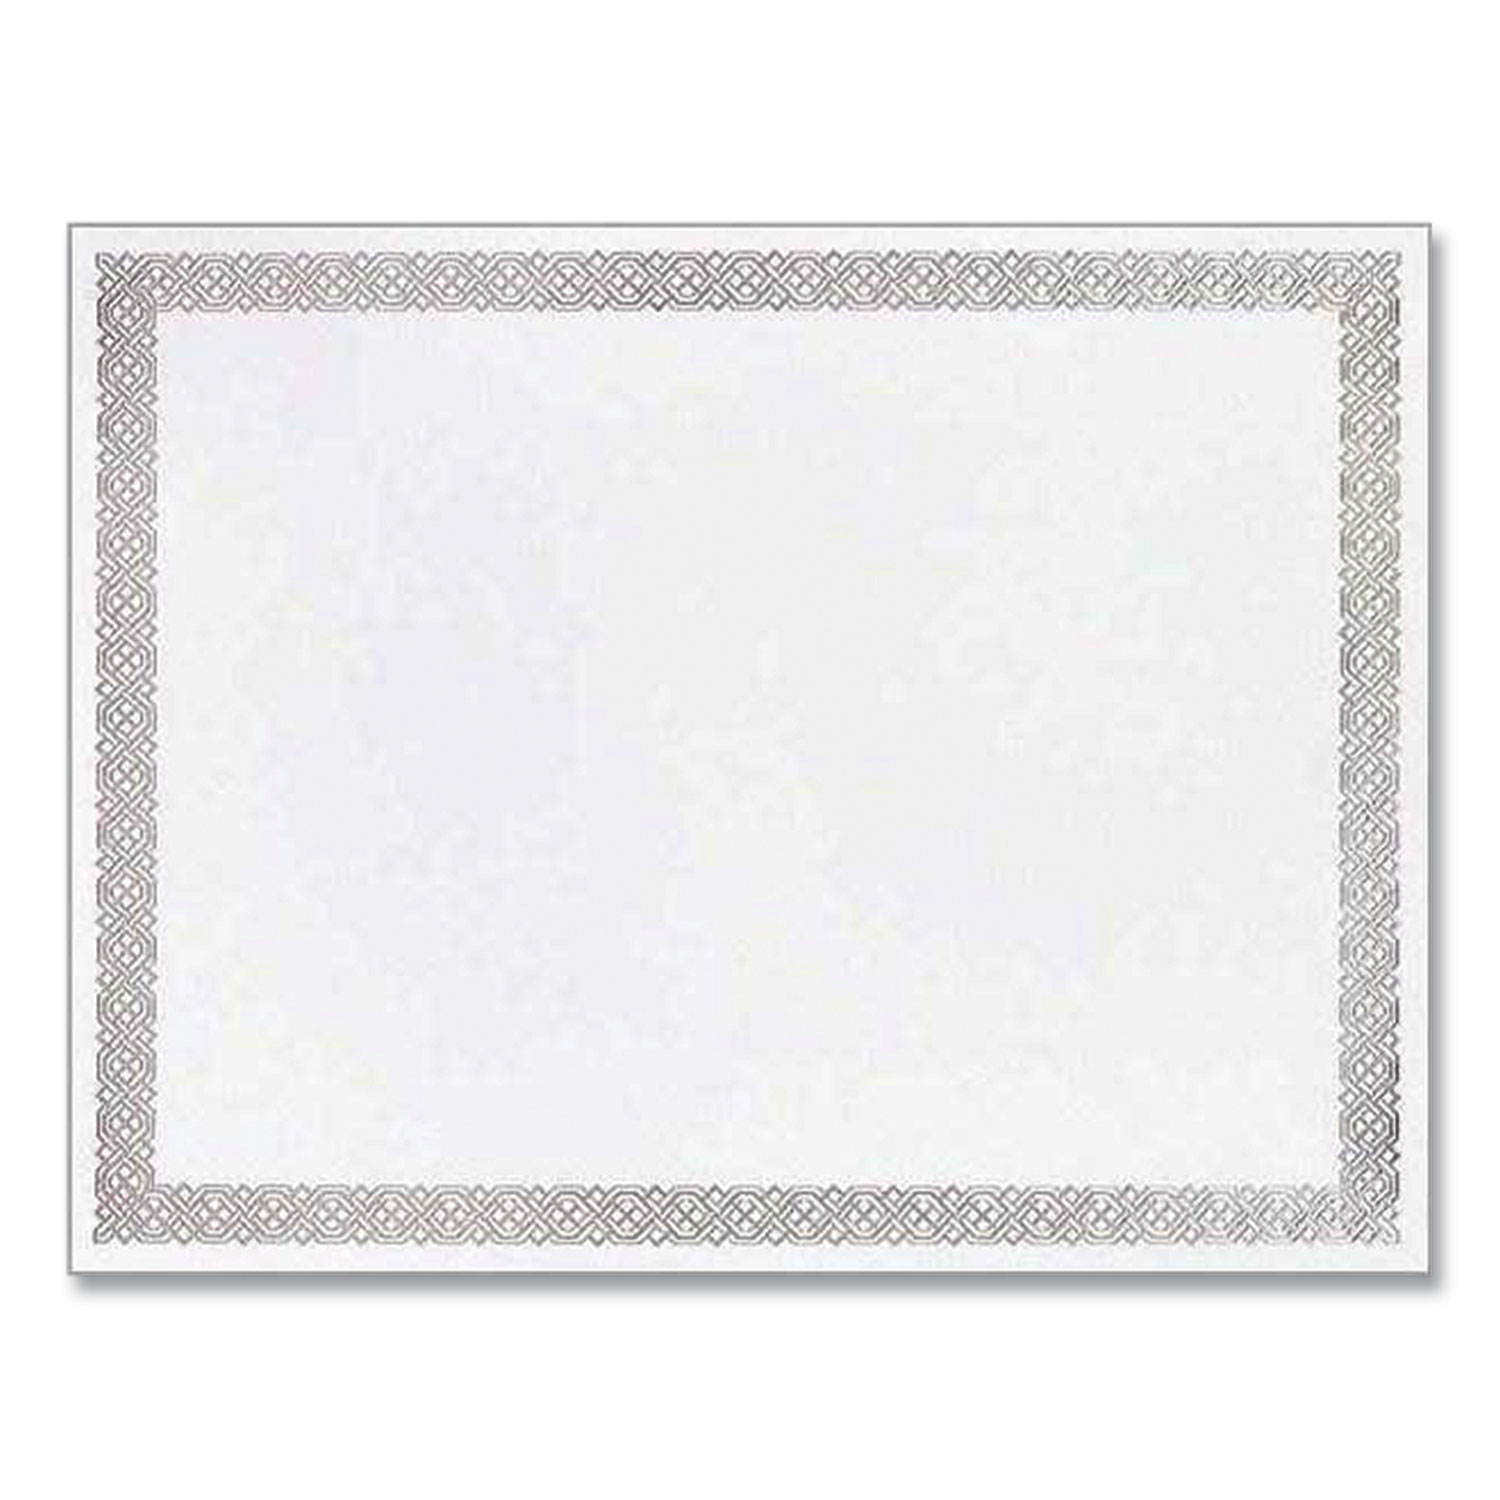  Great Papers! 963027S Foil Border Certificates, 8.5 x 11, Ivory/Silver, Braided, 15/Pack (GRP926454) 